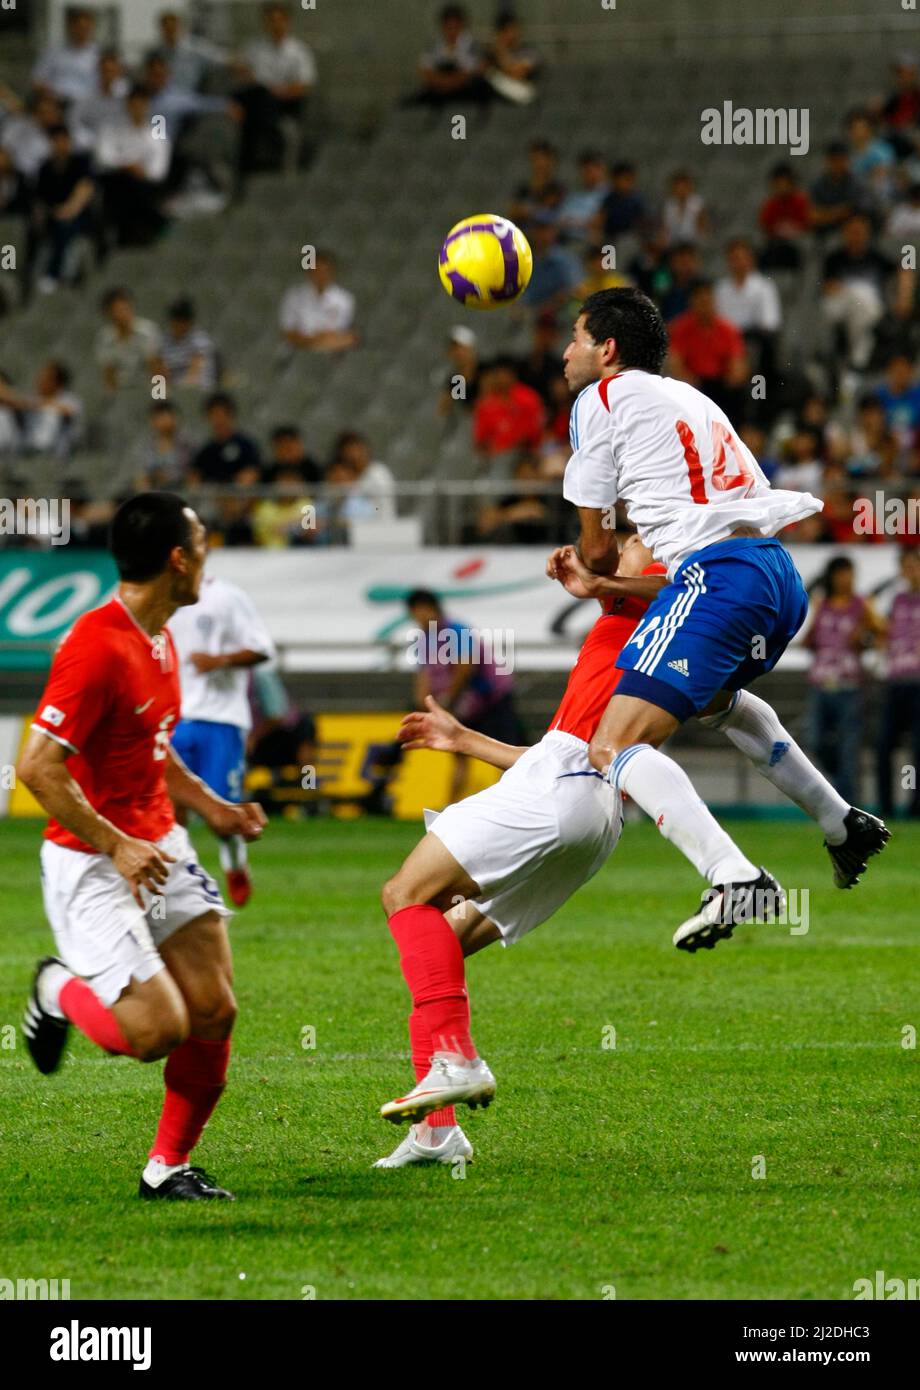 Aug 12, 2009-Seoul, South Korea-Park Chu-Young(under), South Korea, and Antolin Alcaraz, Paraguay, compete for the ball during the international friendly match between South Korea and Paraguay at Seoul Worldcup stadium on August 12, 2009 in Seoul, South Korea. Stock Photo